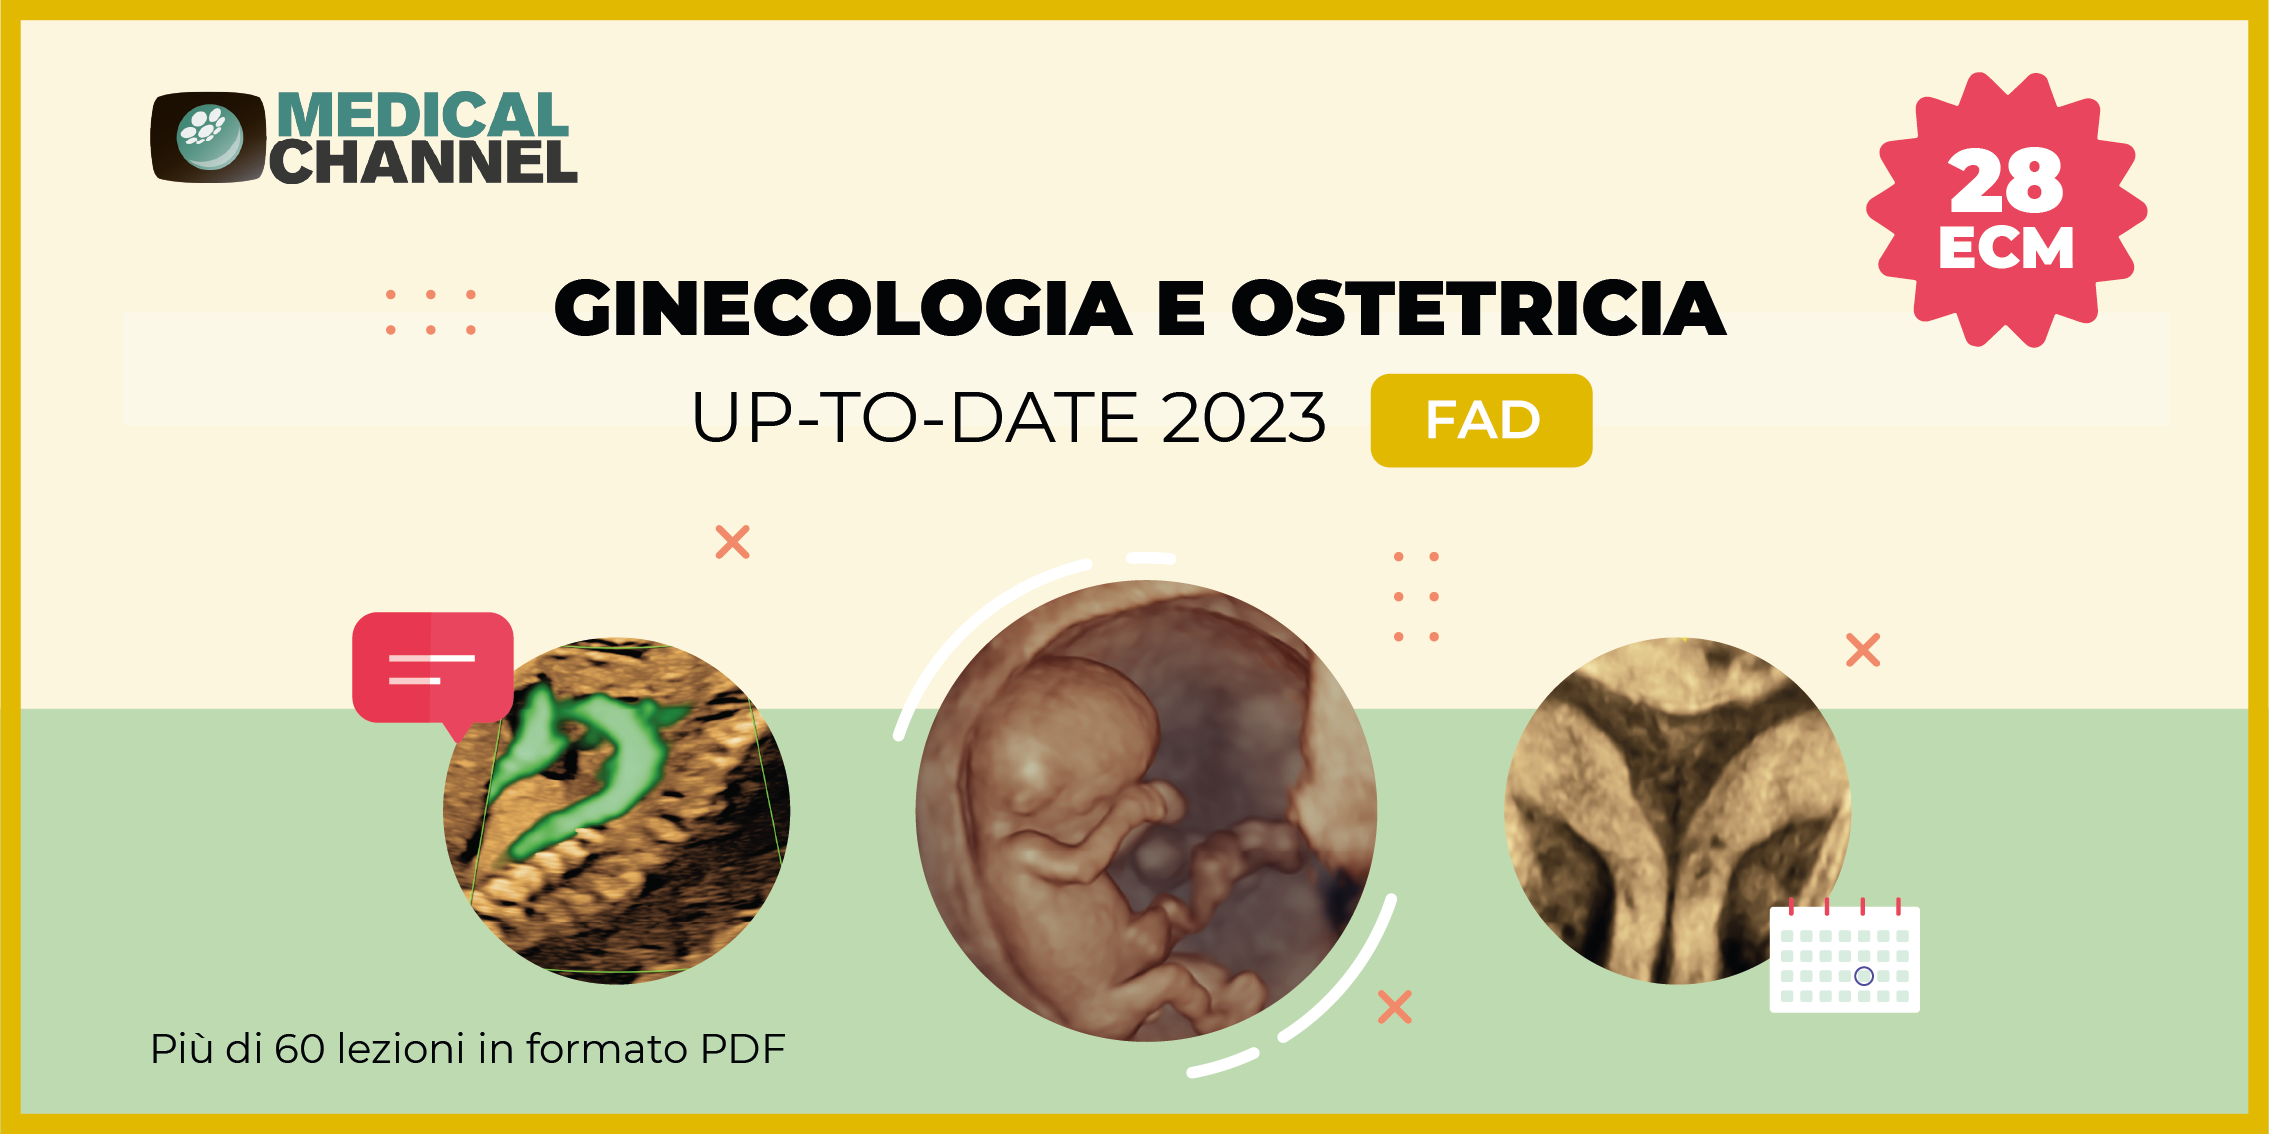 GINECOLOGIA E OSTETRICA: UP-TO-DATE 2023